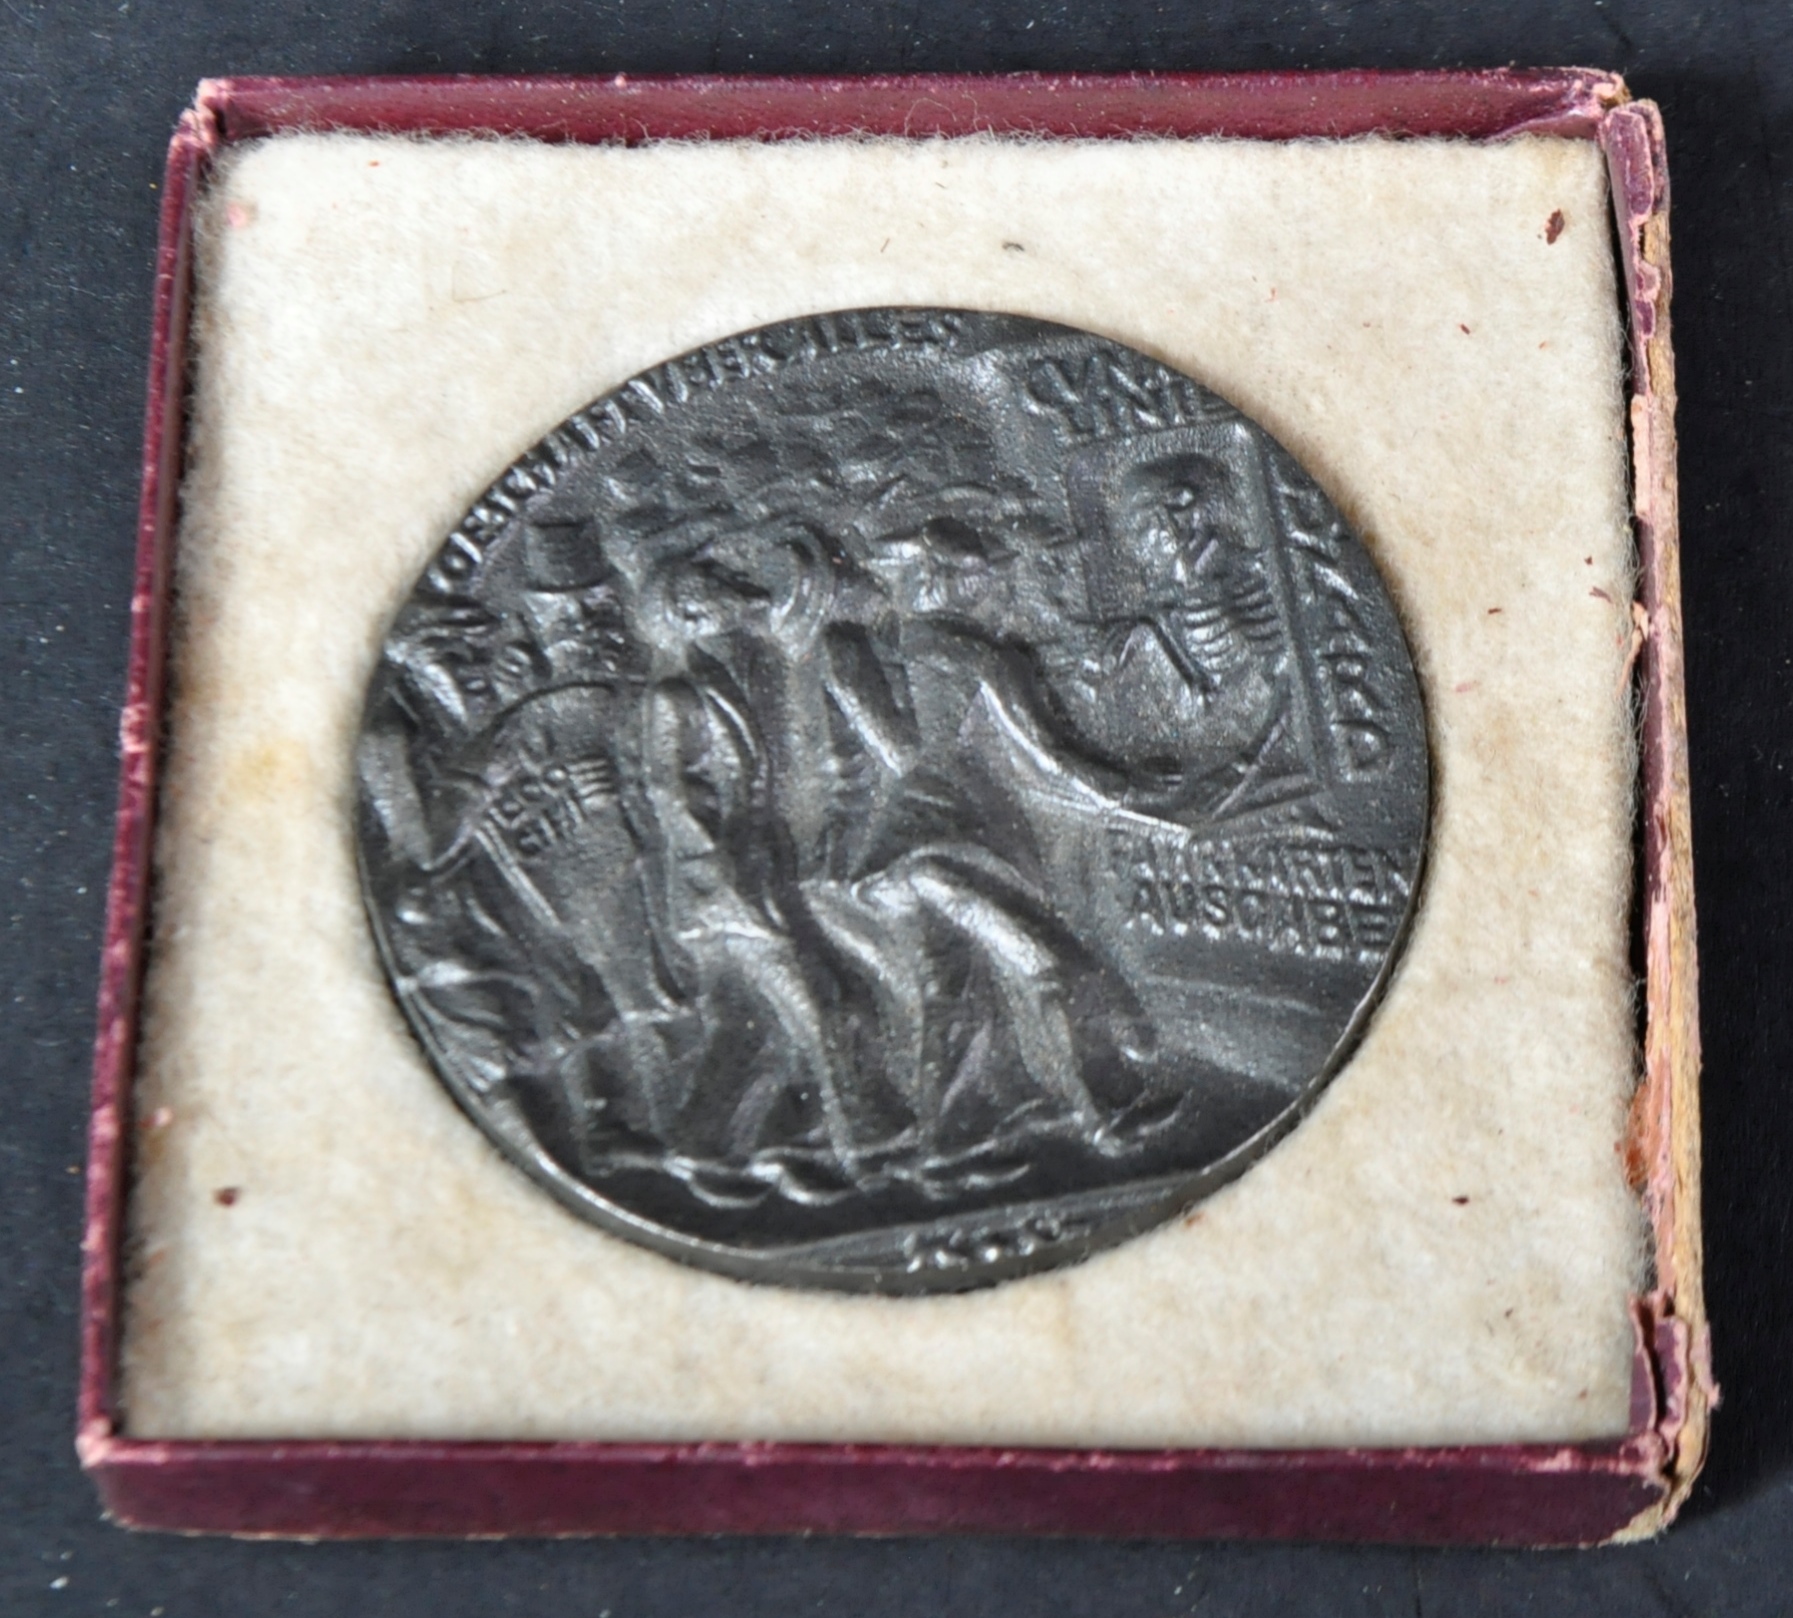 RMS LUSITANIA - WWI FIRST WORLD WAR PERIOD SINKING MEDAL - Image 3 of 4